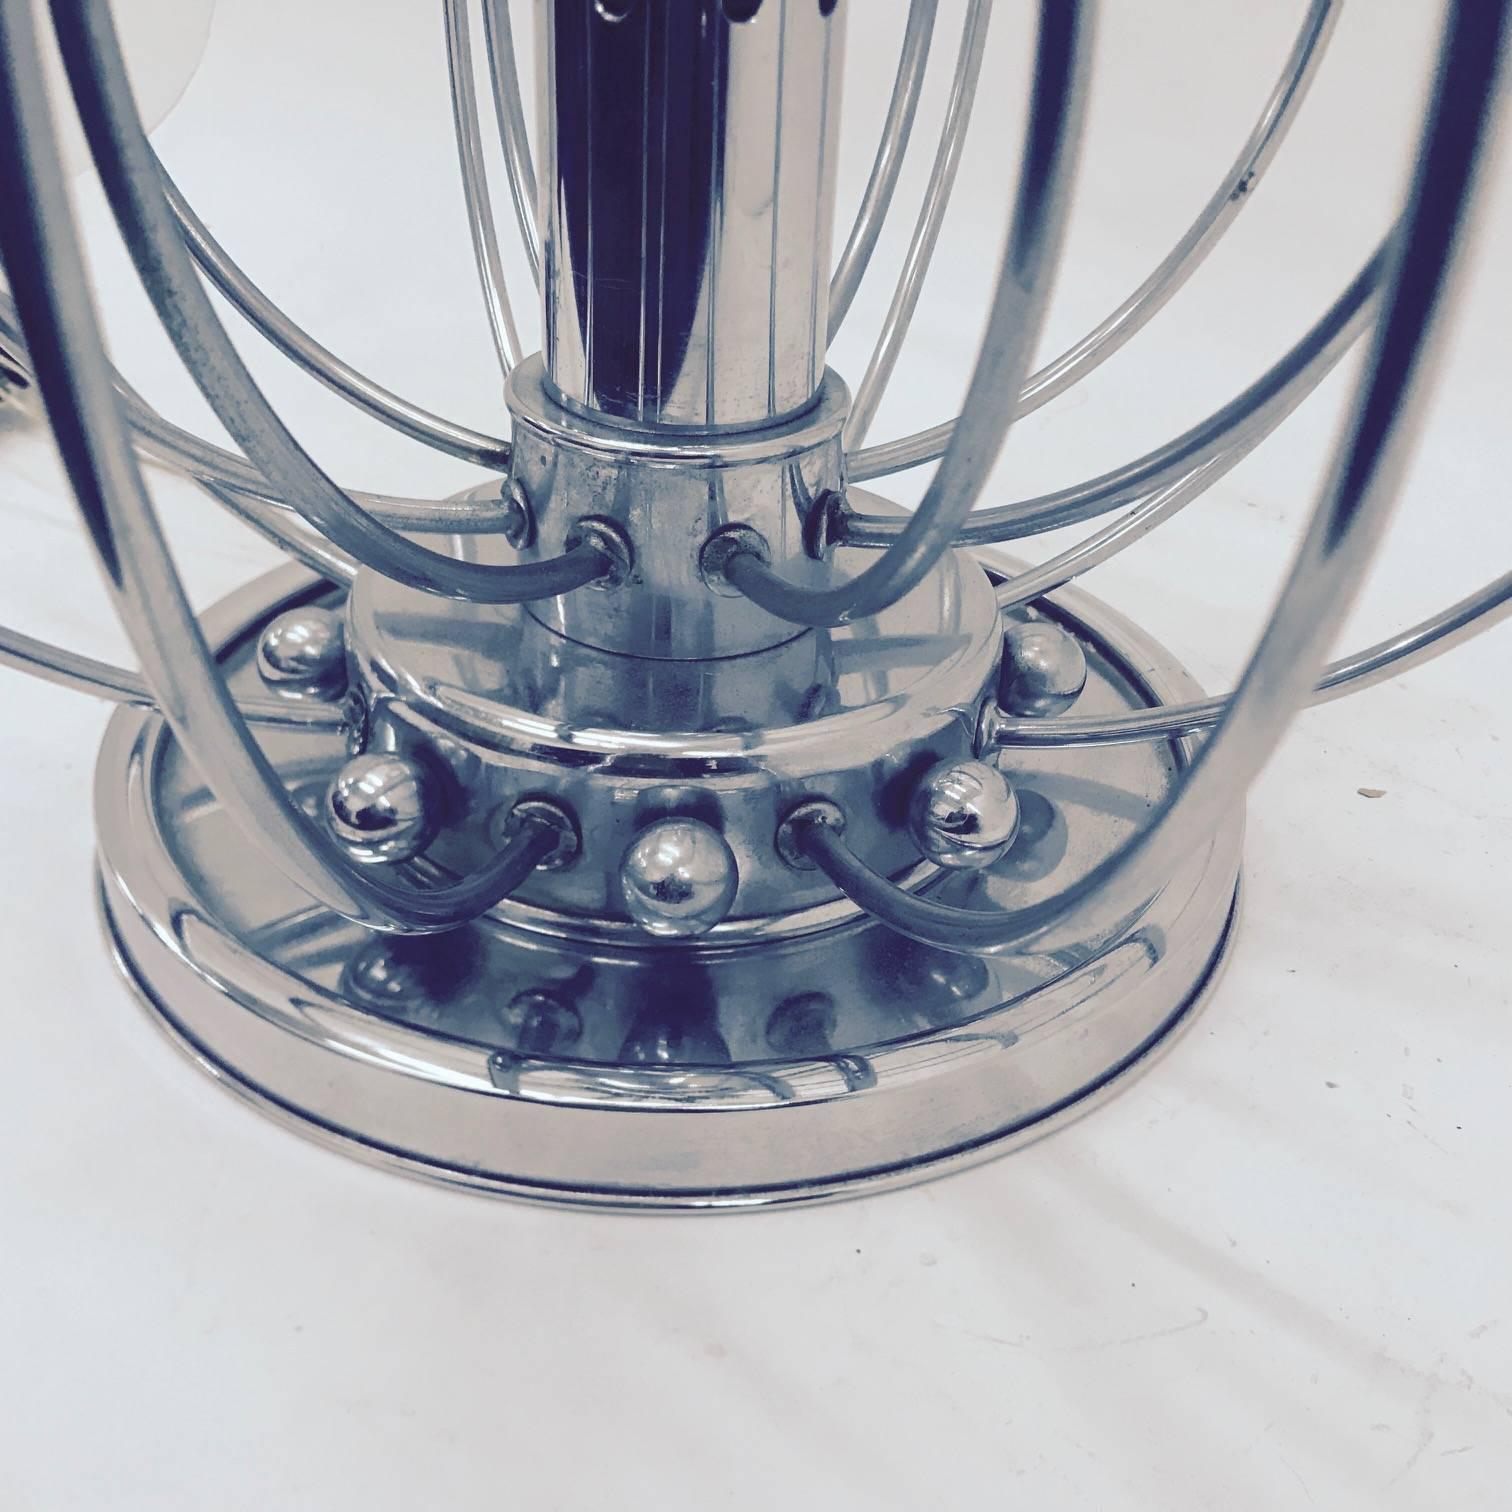 Mid-20th Century 1970s Rare Space Age Chromed Italian Table Lamp in the style of Pistillo Lamp